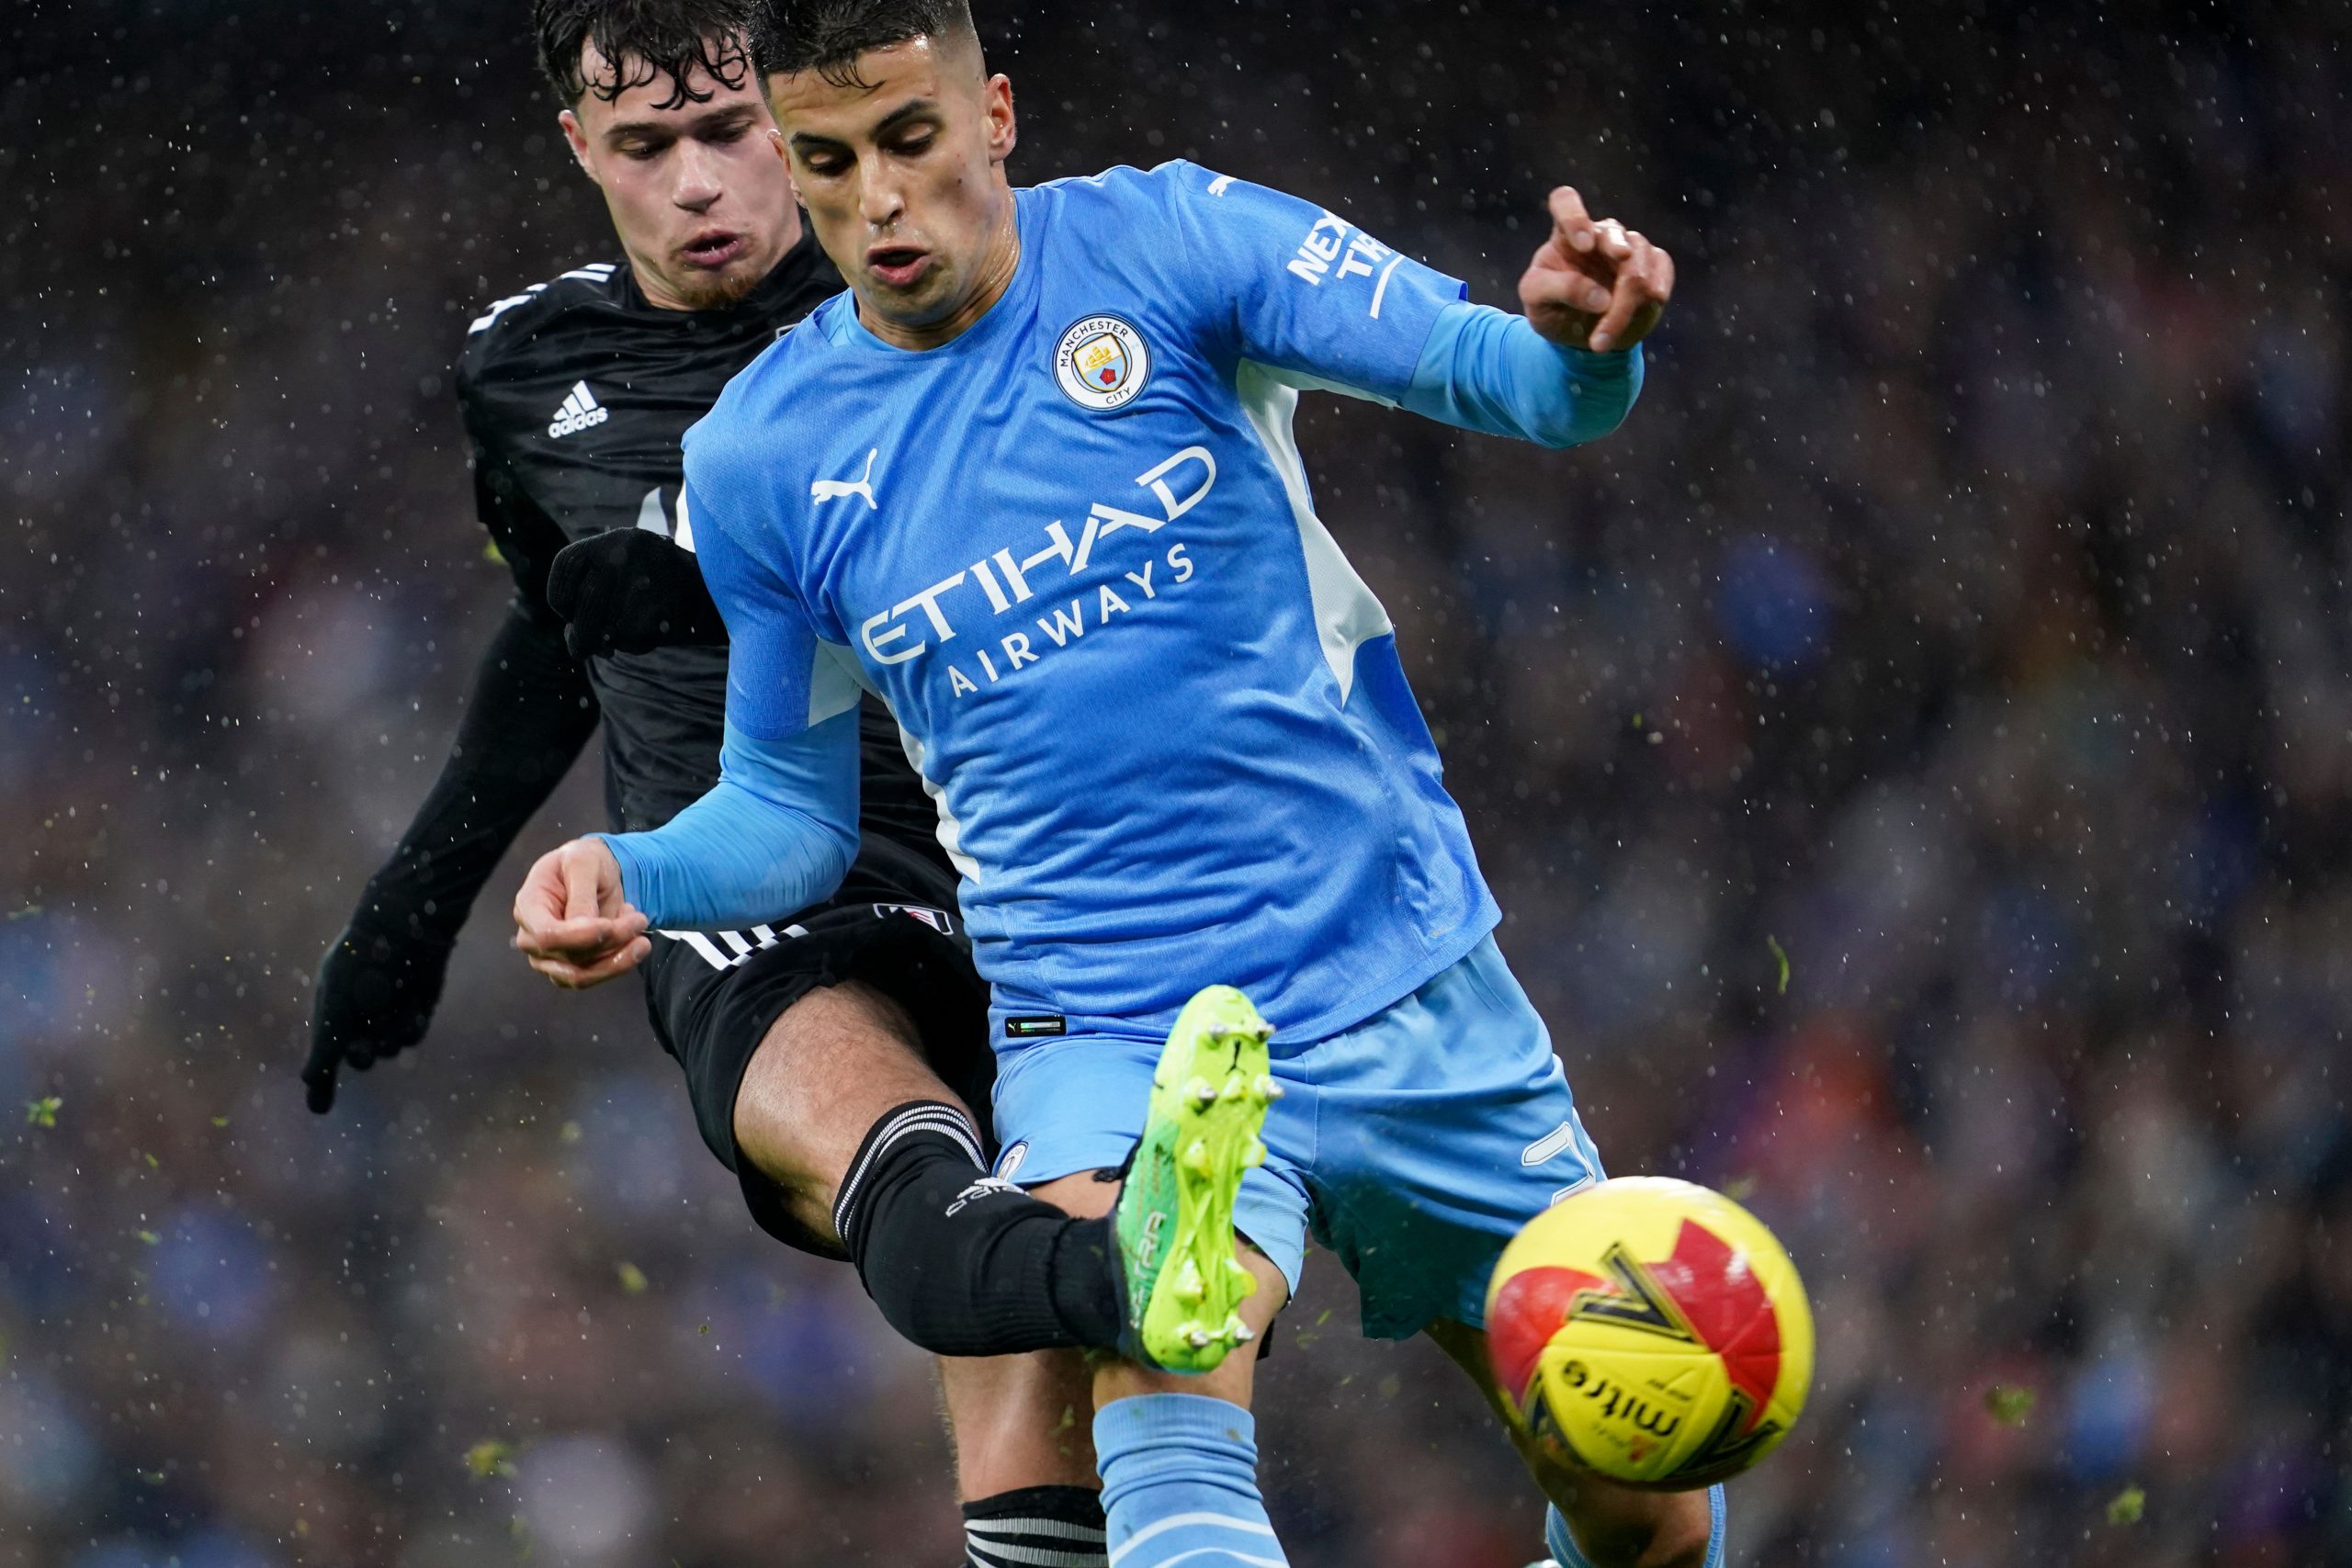 Joao Cancelo’s value soars as Manchester City resumes Champions League quest